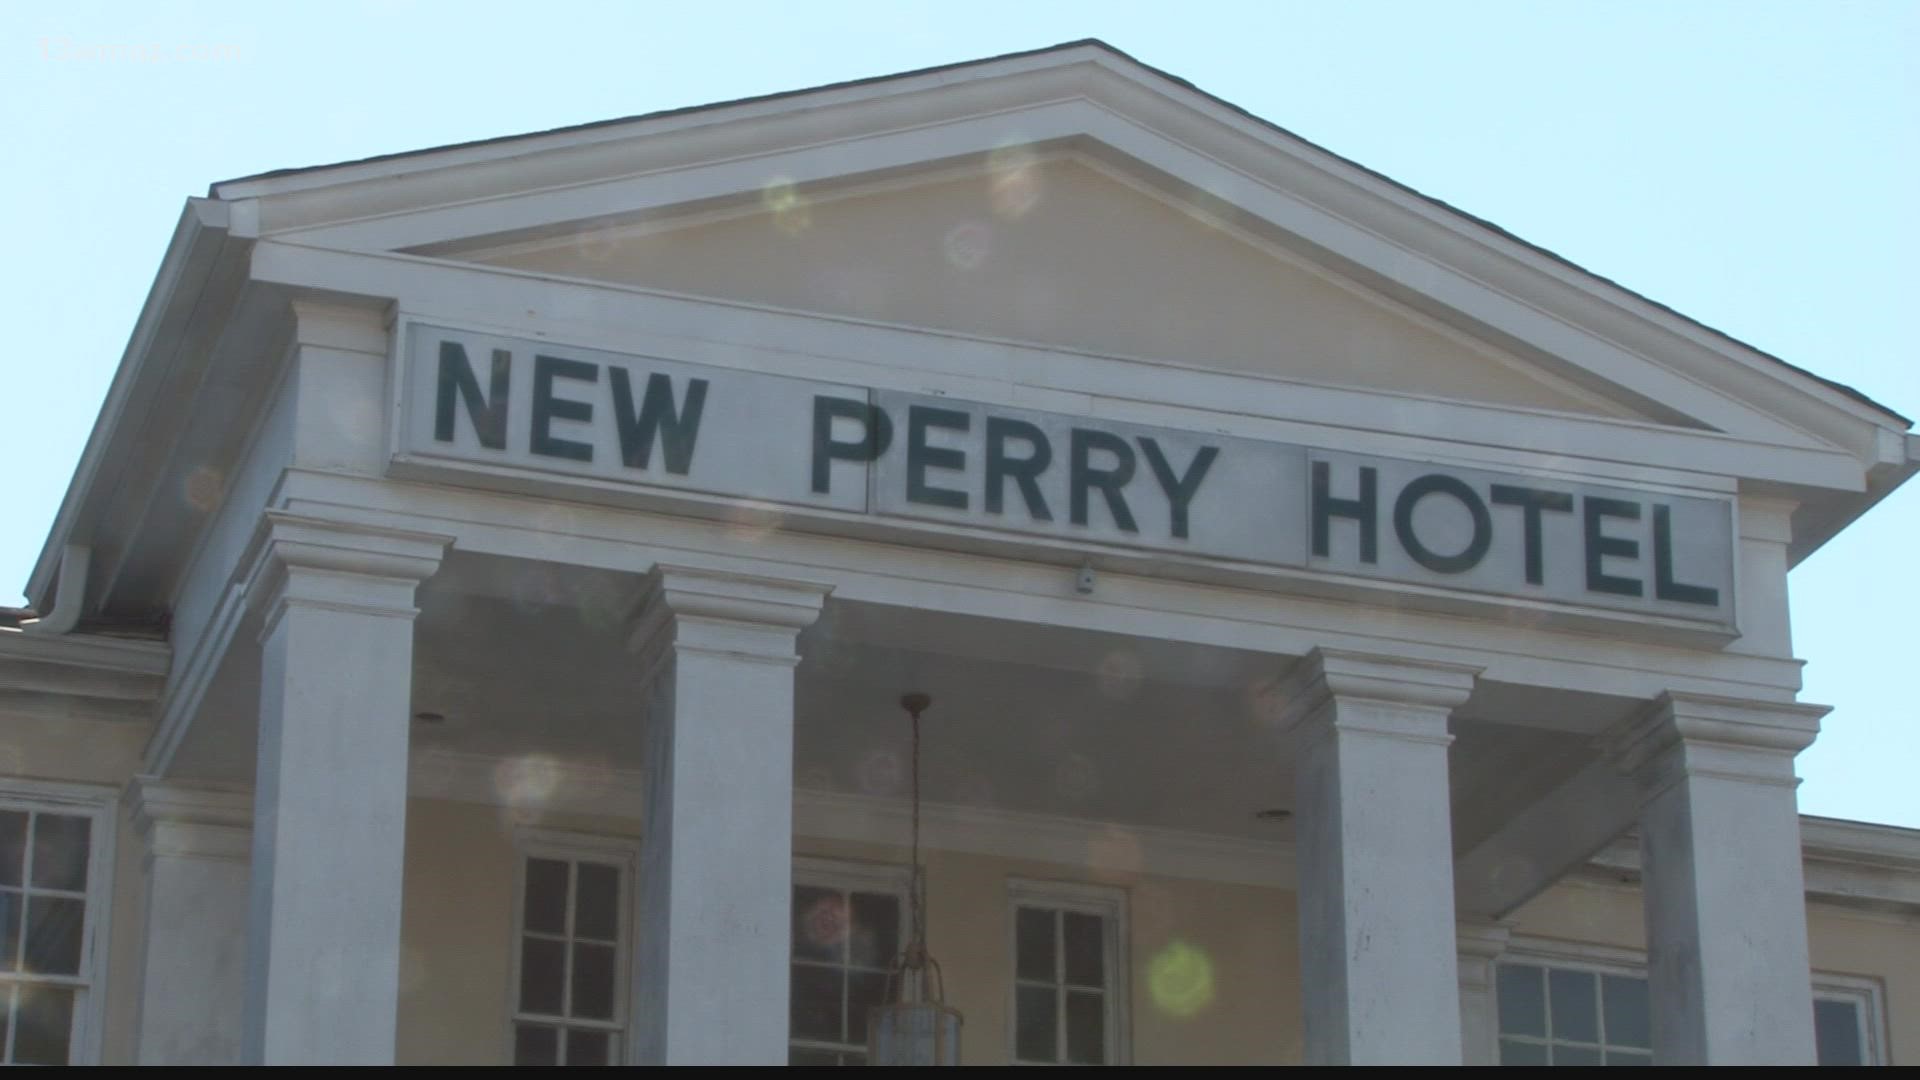 Four years after the Halo group bought the New Perry Hotel, they have started work on making it one of Perry’s newest downtown living areas.